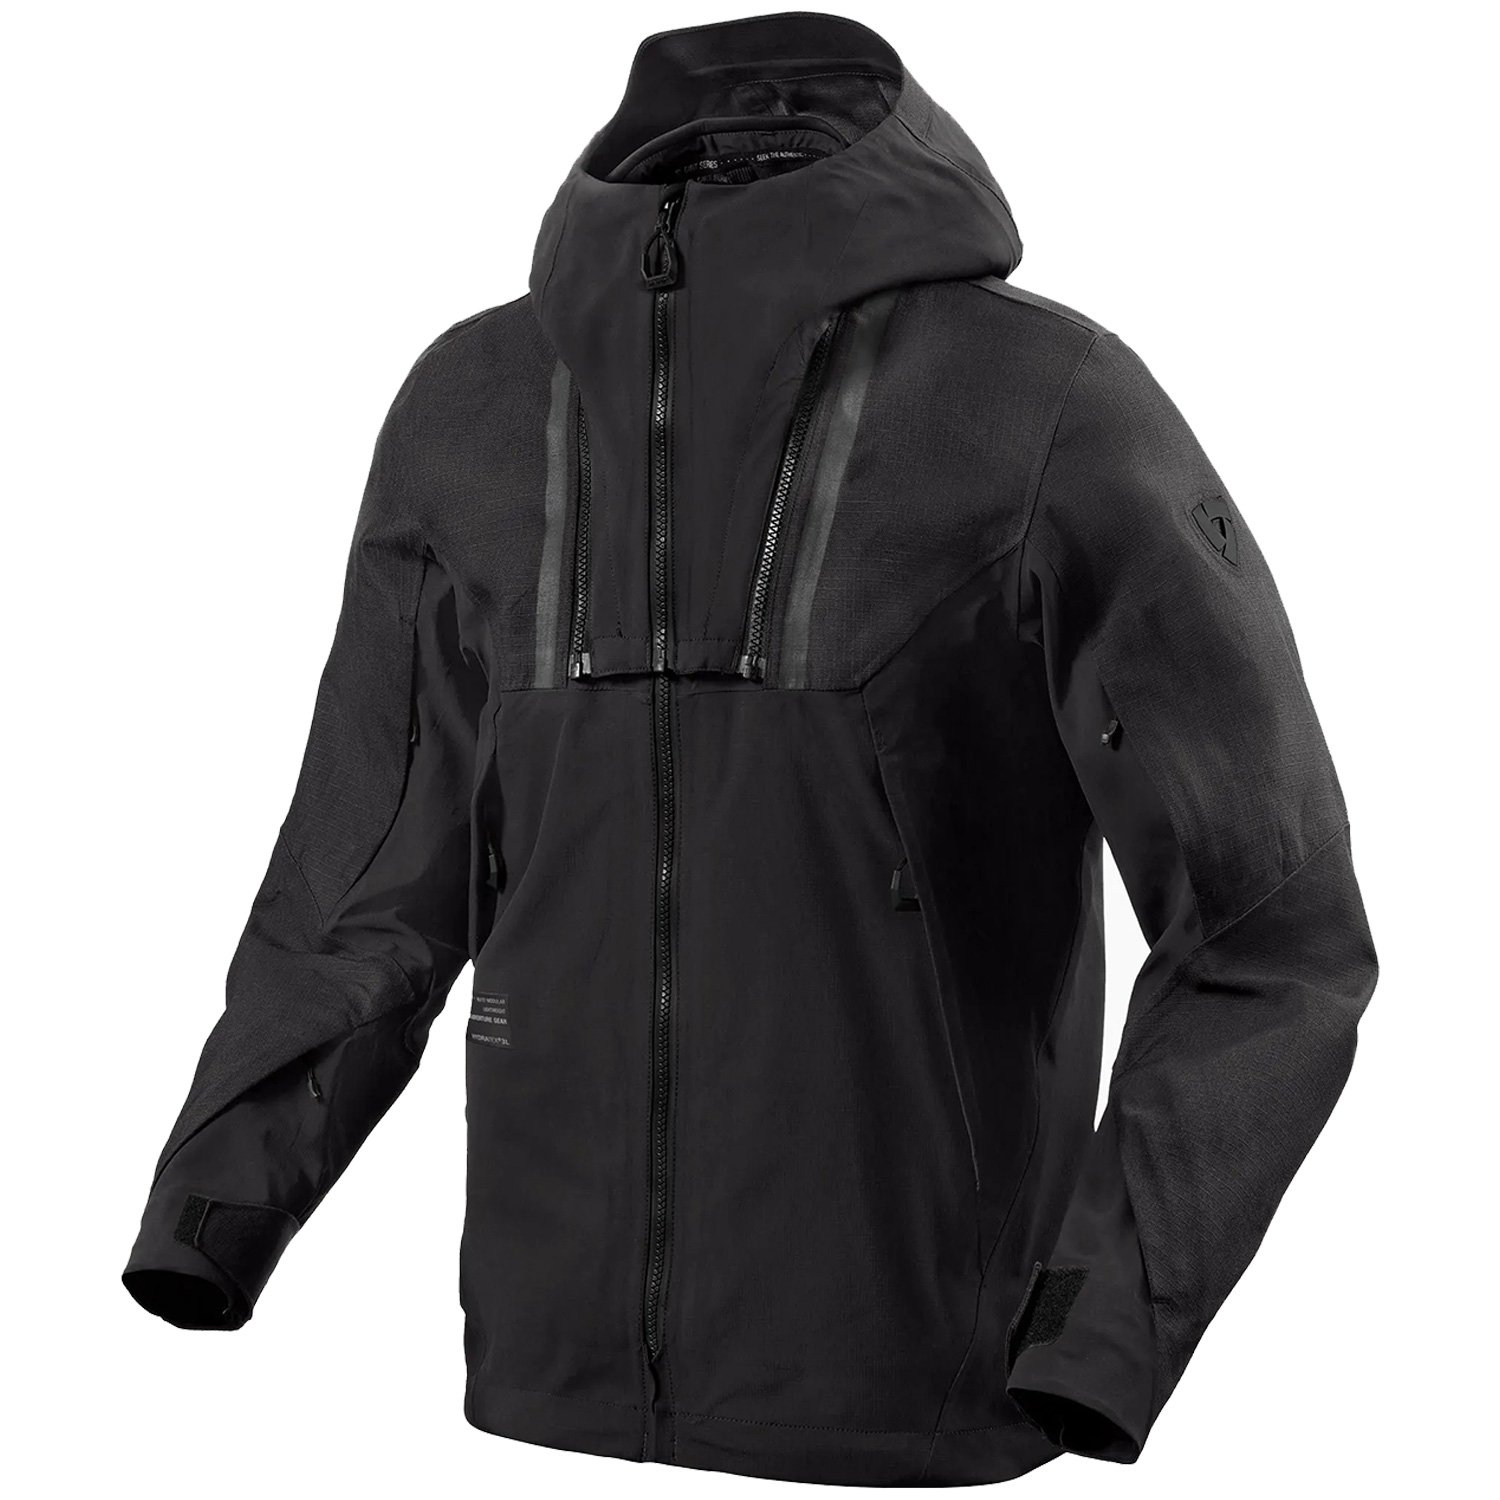 Image of REV'IT! Component 2 H2O Jacket Black Size L ID 8700001370653